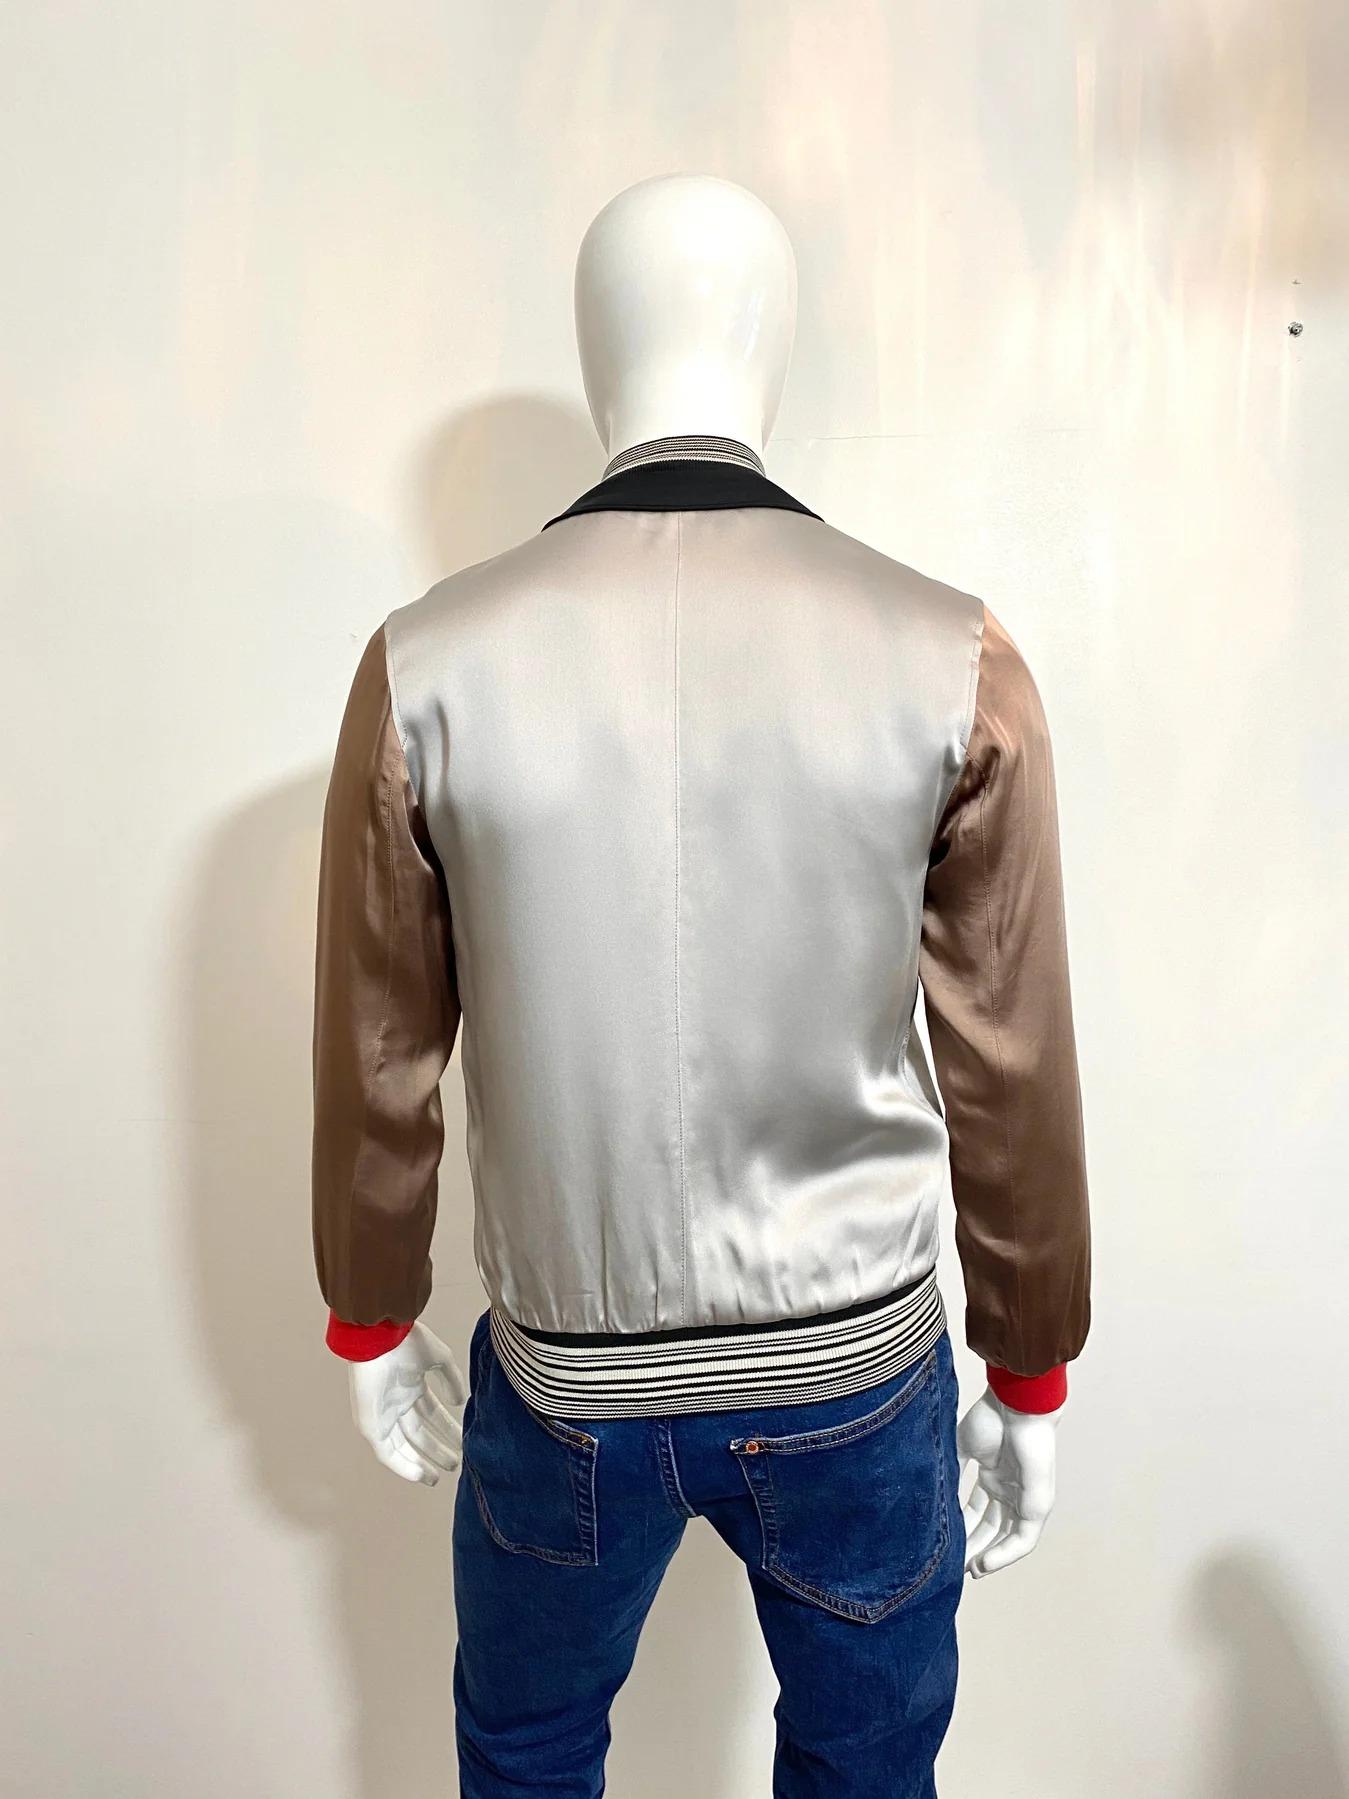 Lanvin Satin Bomber Jacket

Features a crew neck, long sleeves, front zip fastening, side zip pockets in gunmetal grey and an interior pocket. Contrasting ribbed hem cuffs in bright red with stripped neckline and hem in black and white. Taupe tonal